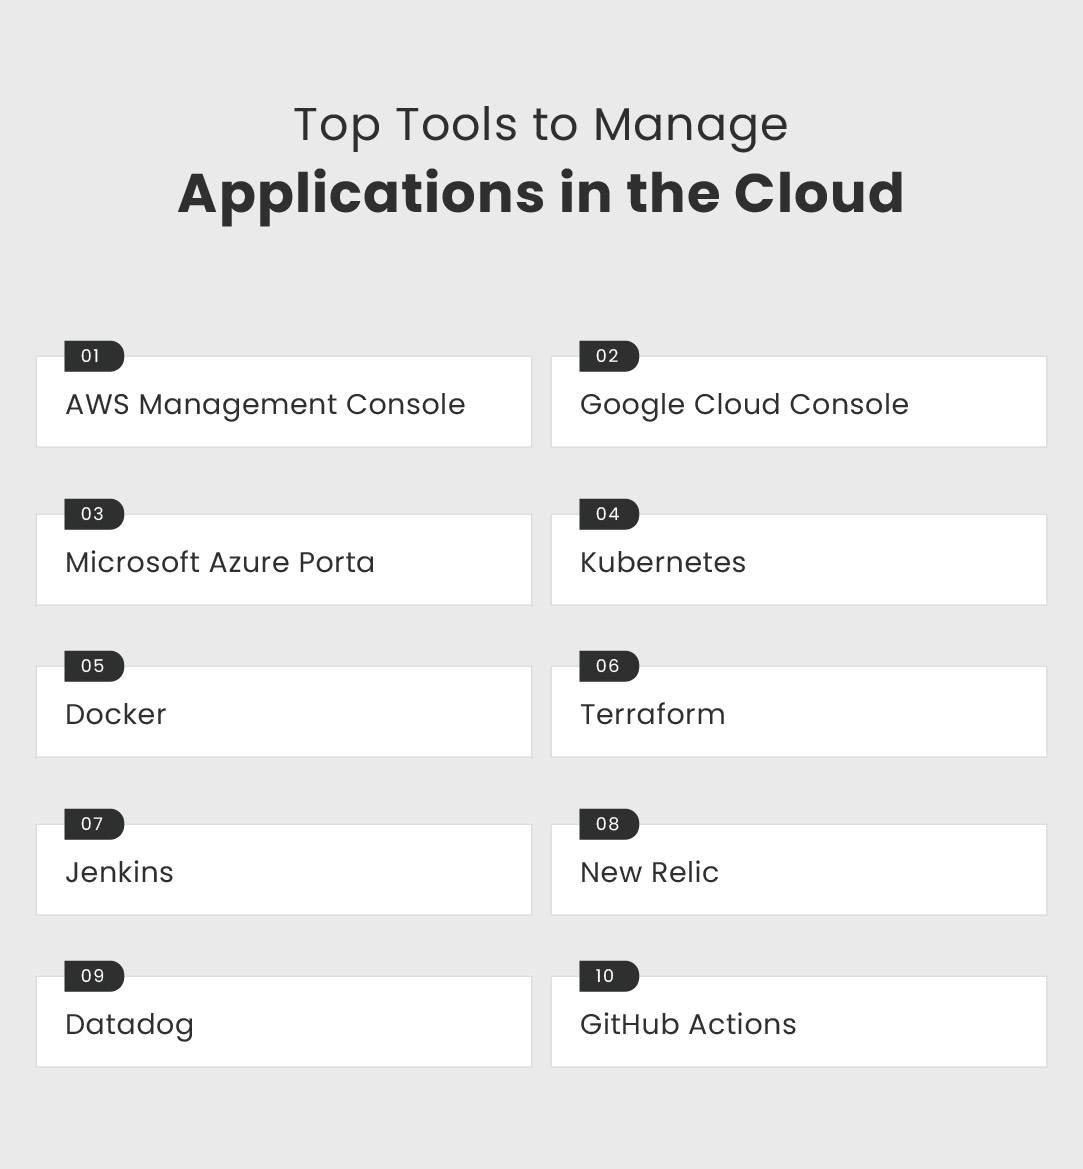 Top Tools to Manage Applications in the Cloud